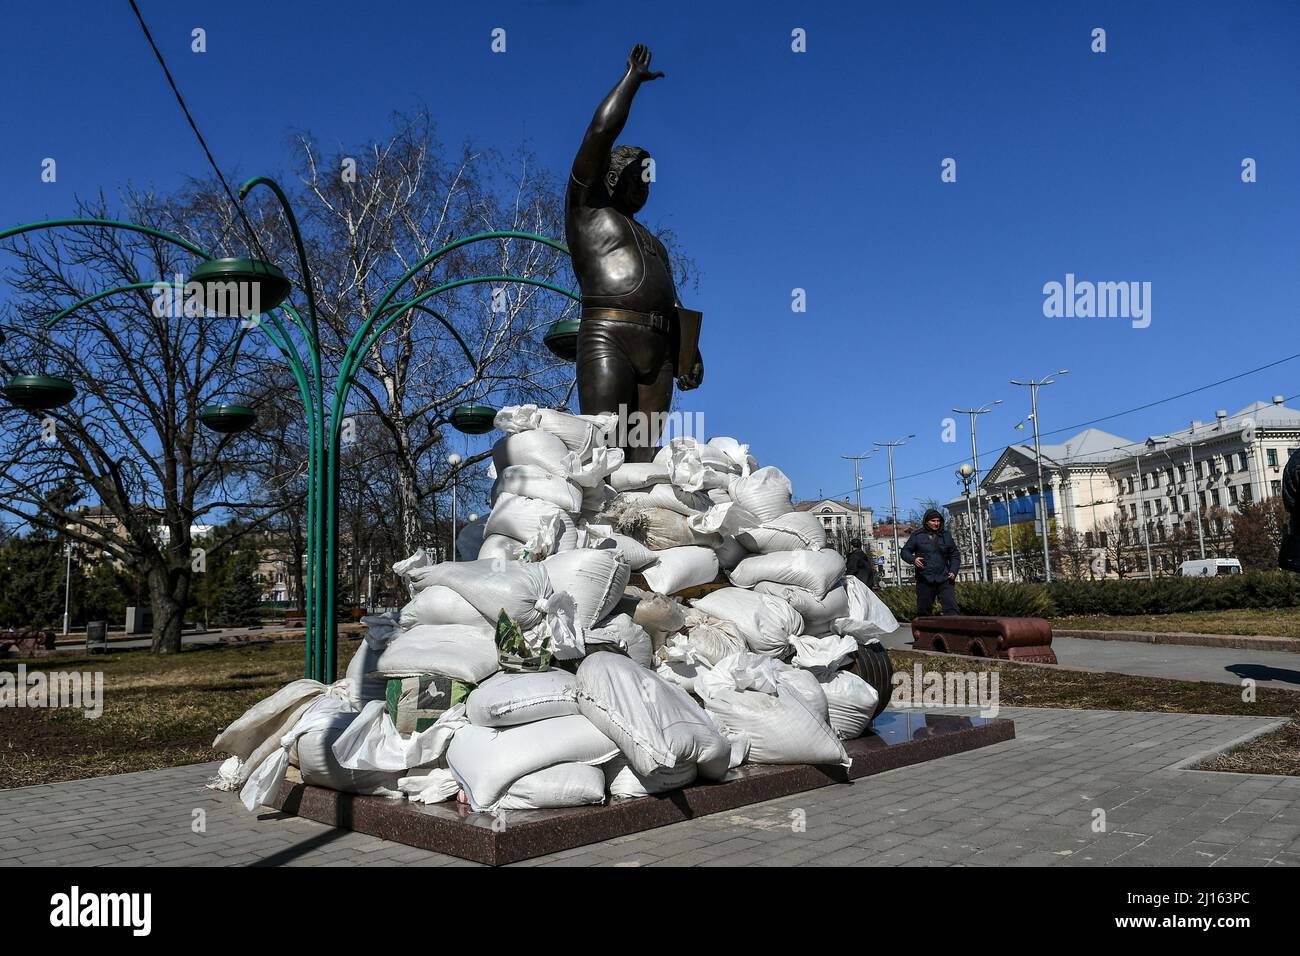 Sandbags piled by local volunteers, historians and museum employees seal the monument to Ukrainian weightlifter, Olympic gold medallist Leonid Zhabotynskyi in a bid to protect the statue from damage in case of Russian attacks, Zaporizhzhia, southeastern Ukraine, March 22, 2022. Photo by Dmytro Smoliyenko/Ukrinform/ABACAPRESS.COM Stock Photo